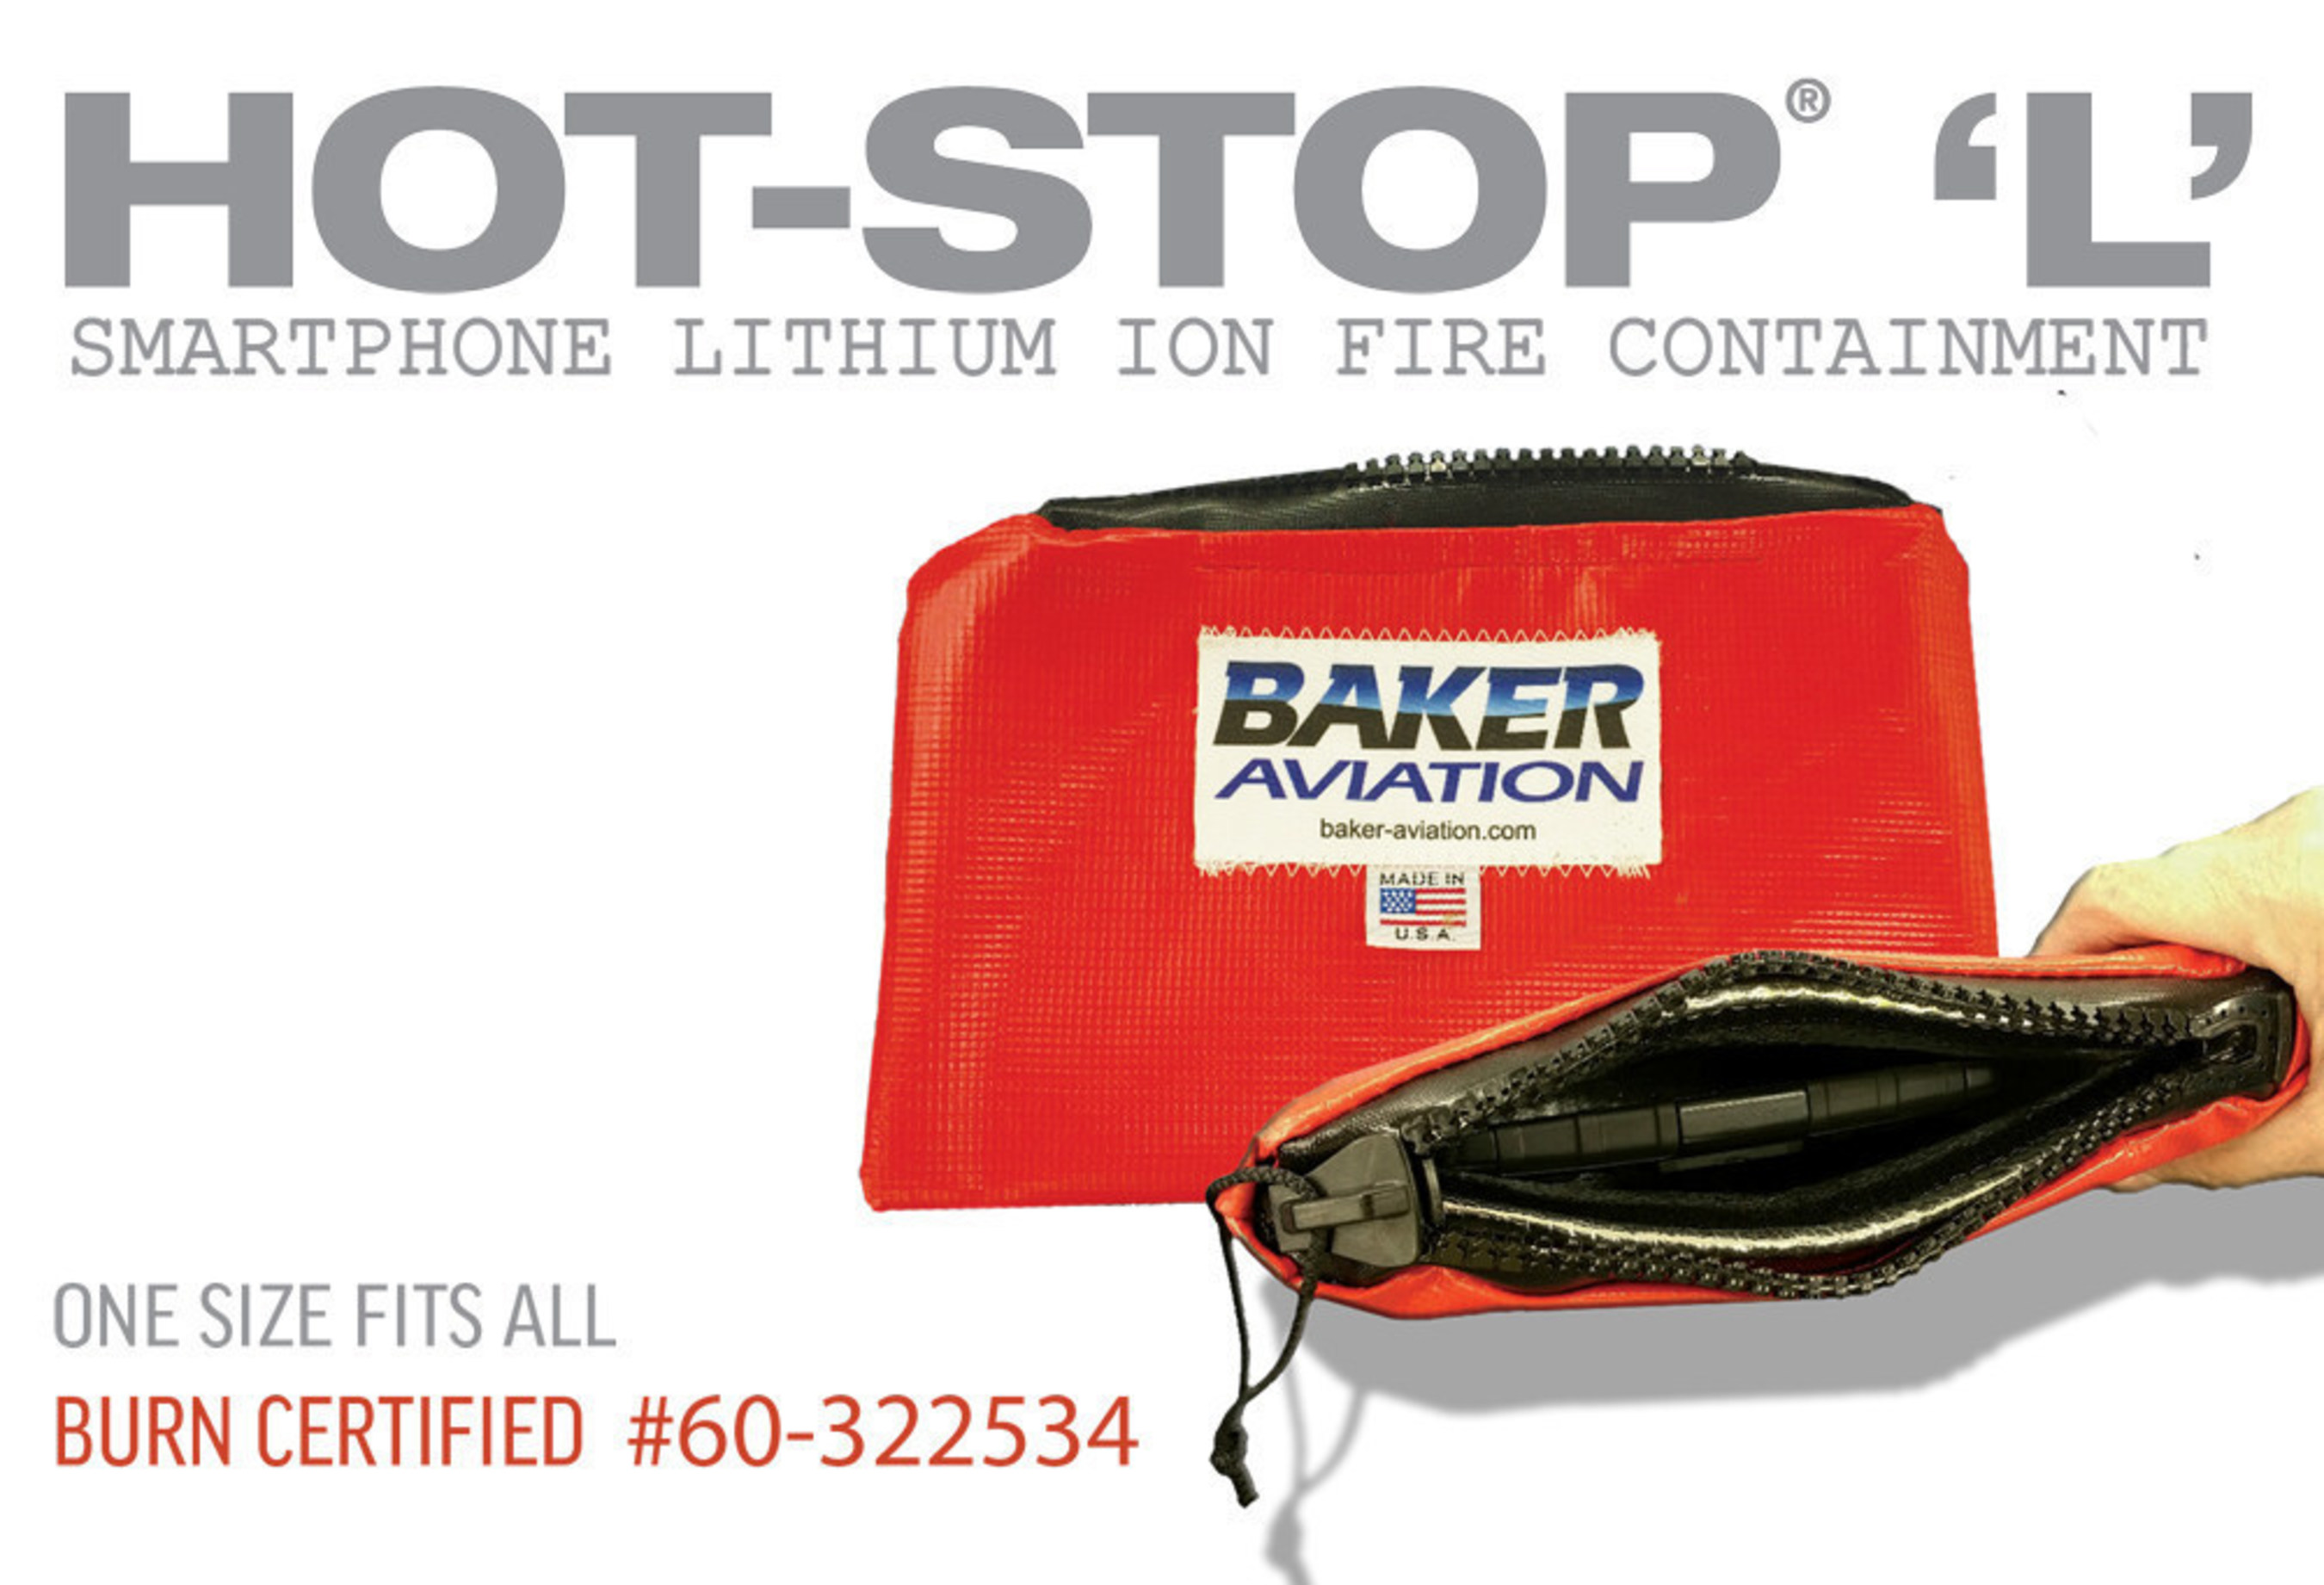 HOT-STOP 'L' Smartphone Fire Containment bags safely contain lithium-ion battery device smoke, fires or explosions that are happening on board aircraft today. These custom designed HOT-STOP 'L' Smartphone bags are burn certified and tested and are small enough to take in your carry-on. They can be used to safely store the device while unattended or contain a full thermal runaway until it is burned out if needed. Fly with confidence, Fly with HOT-STOP 'L'